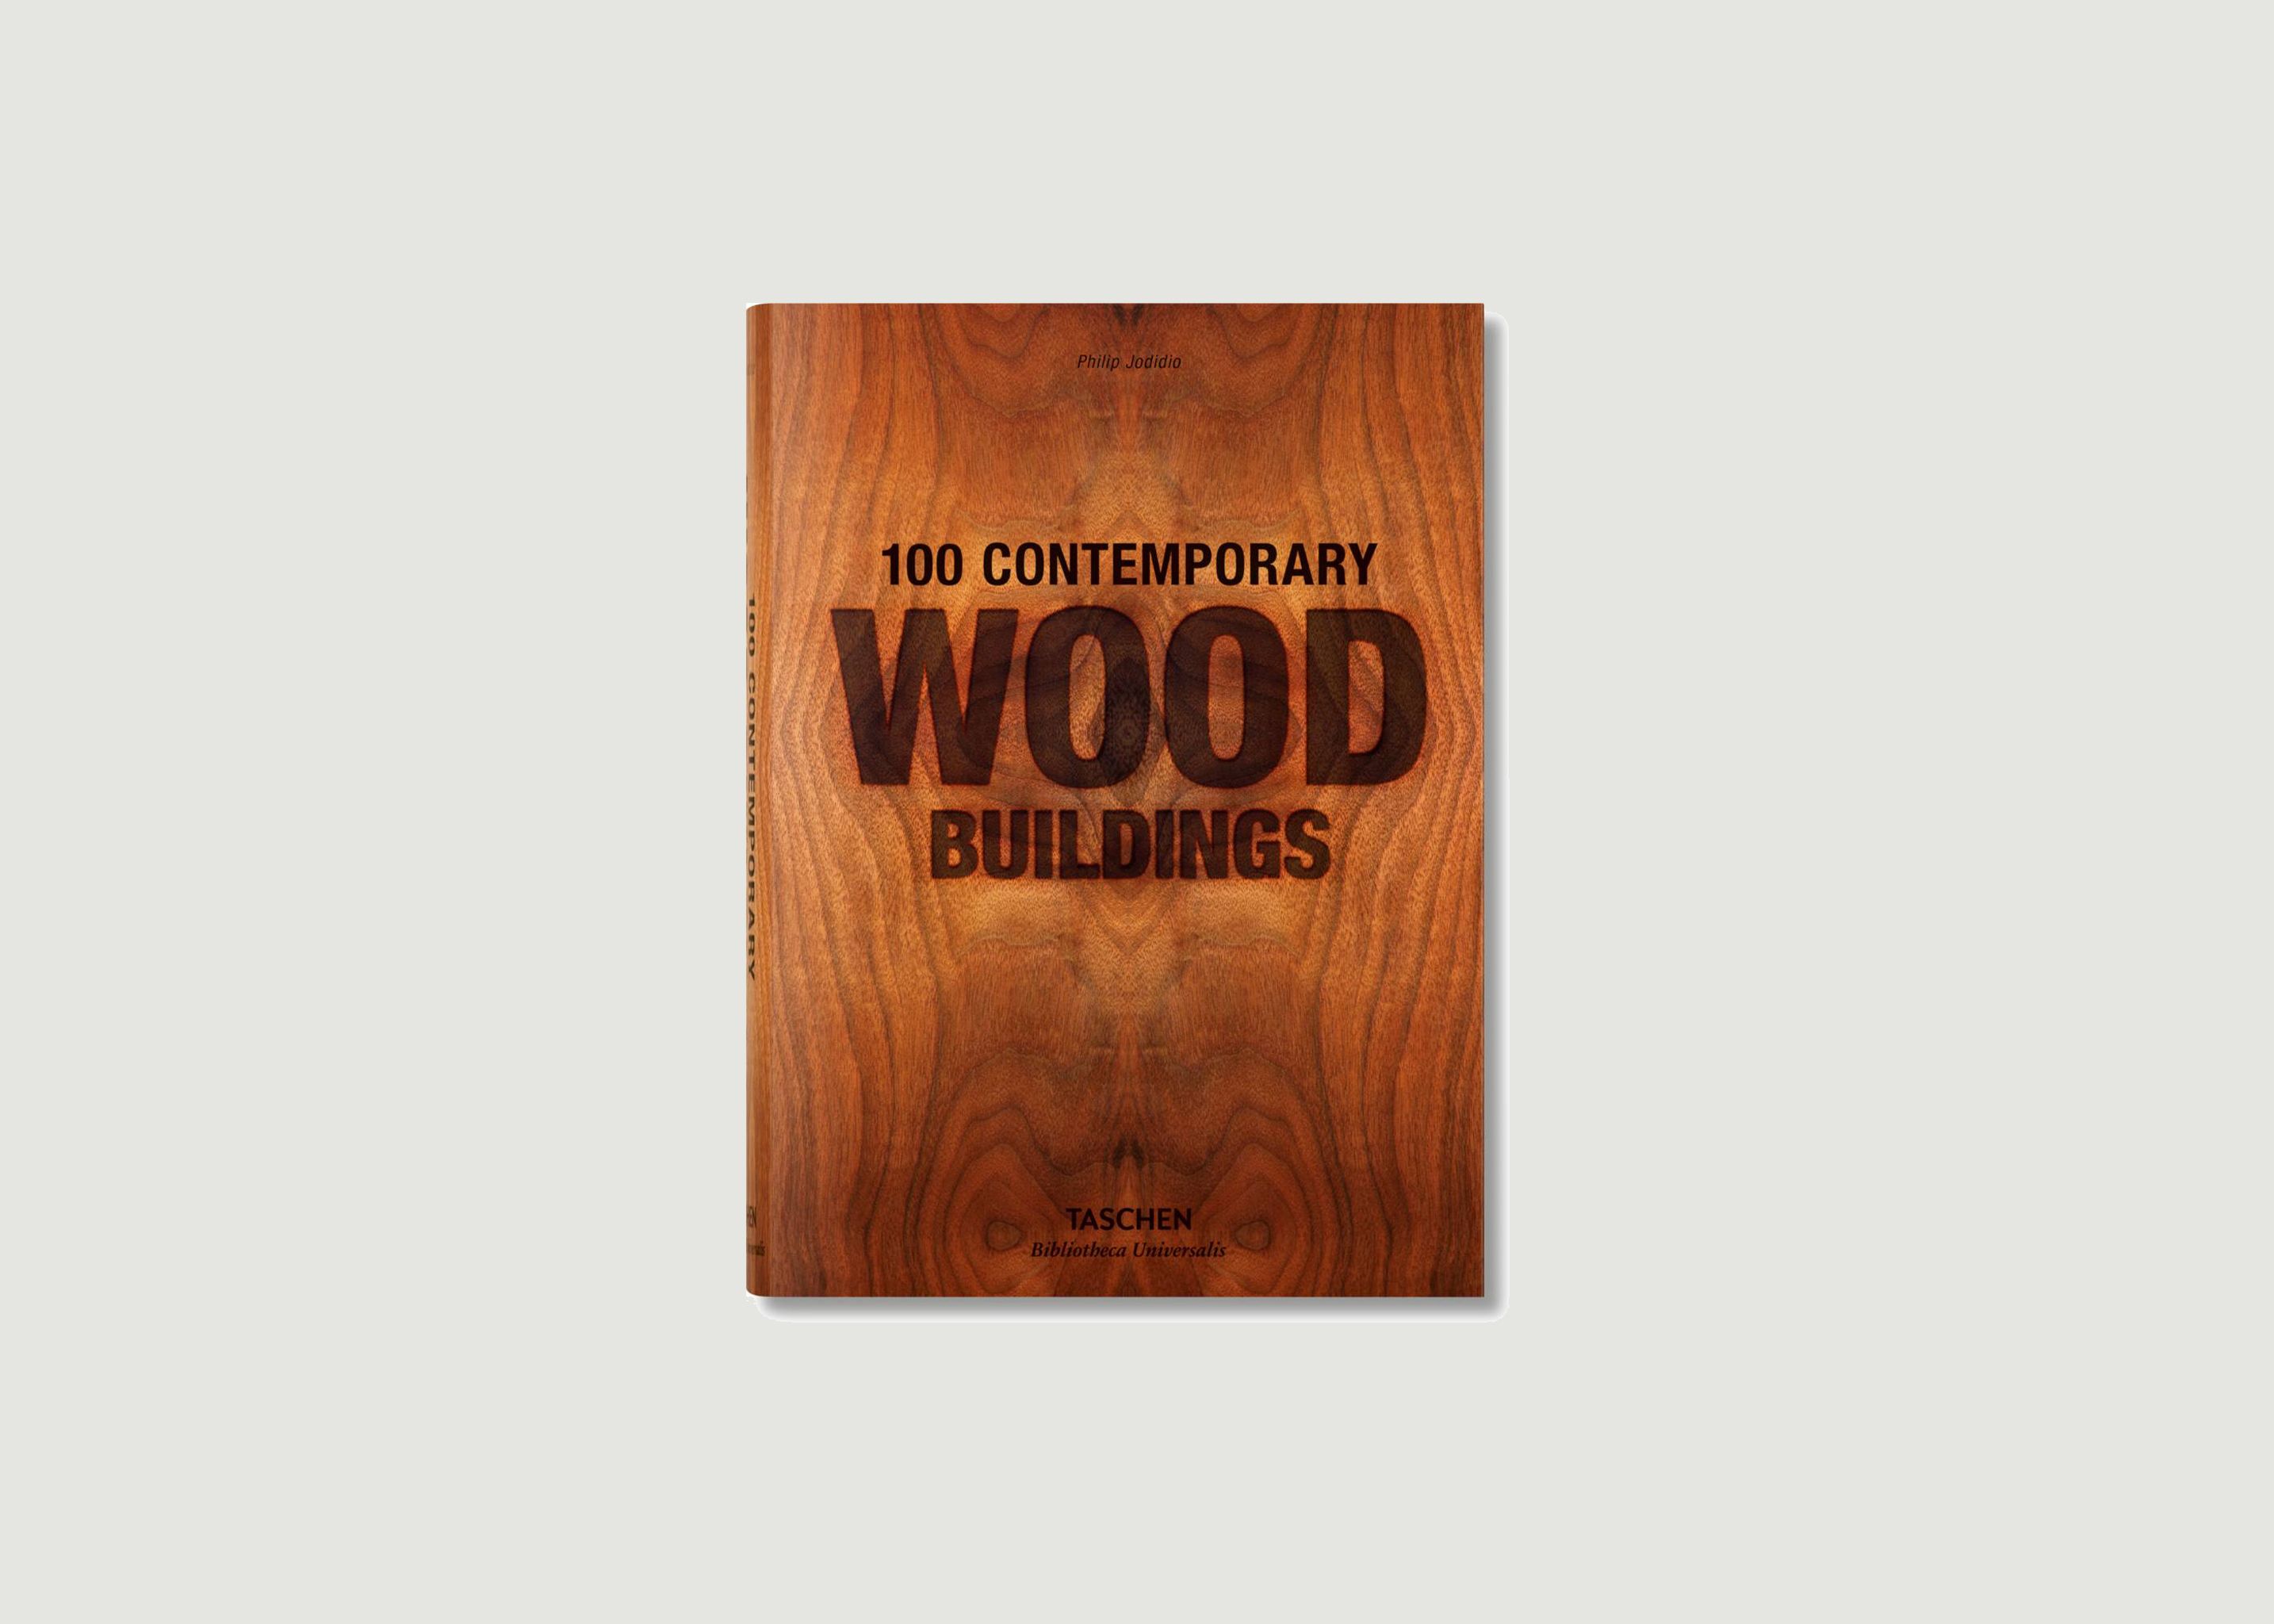 Wood　Buildings　Taschen　White　L'Exception　100　Contemporary